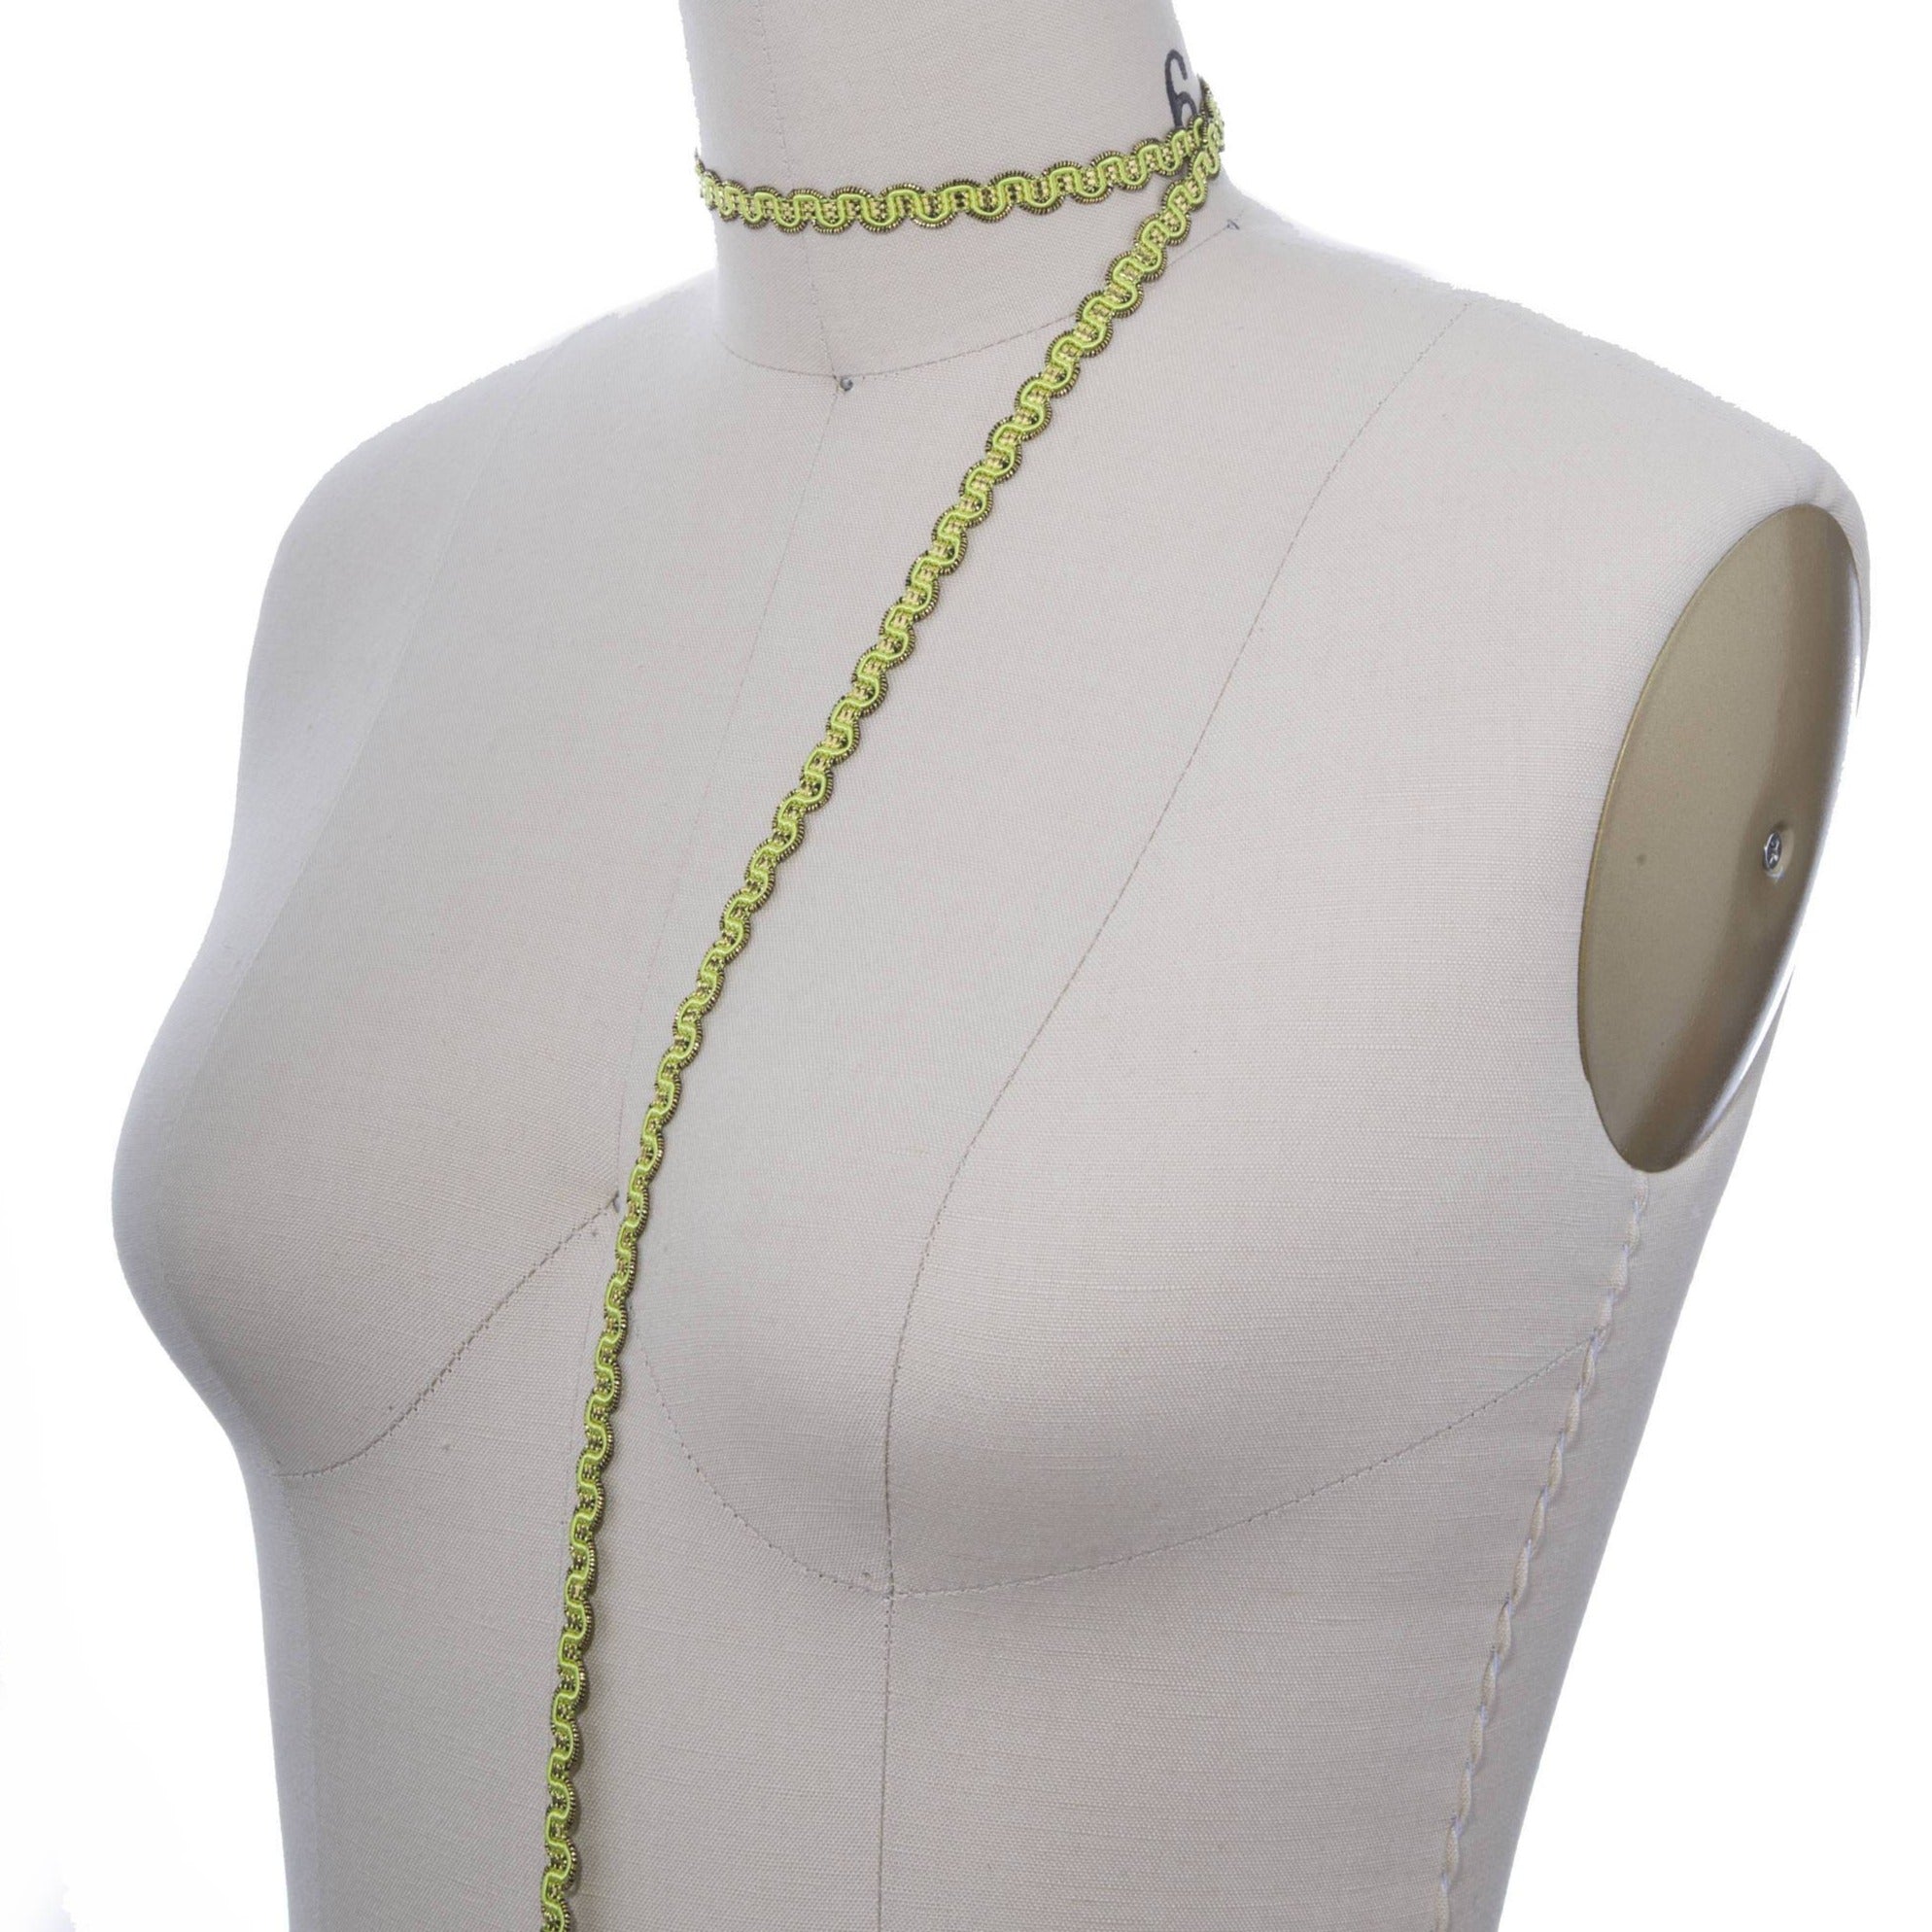 3/8" Neon Lime Green Gimp Trim With Gold Accents